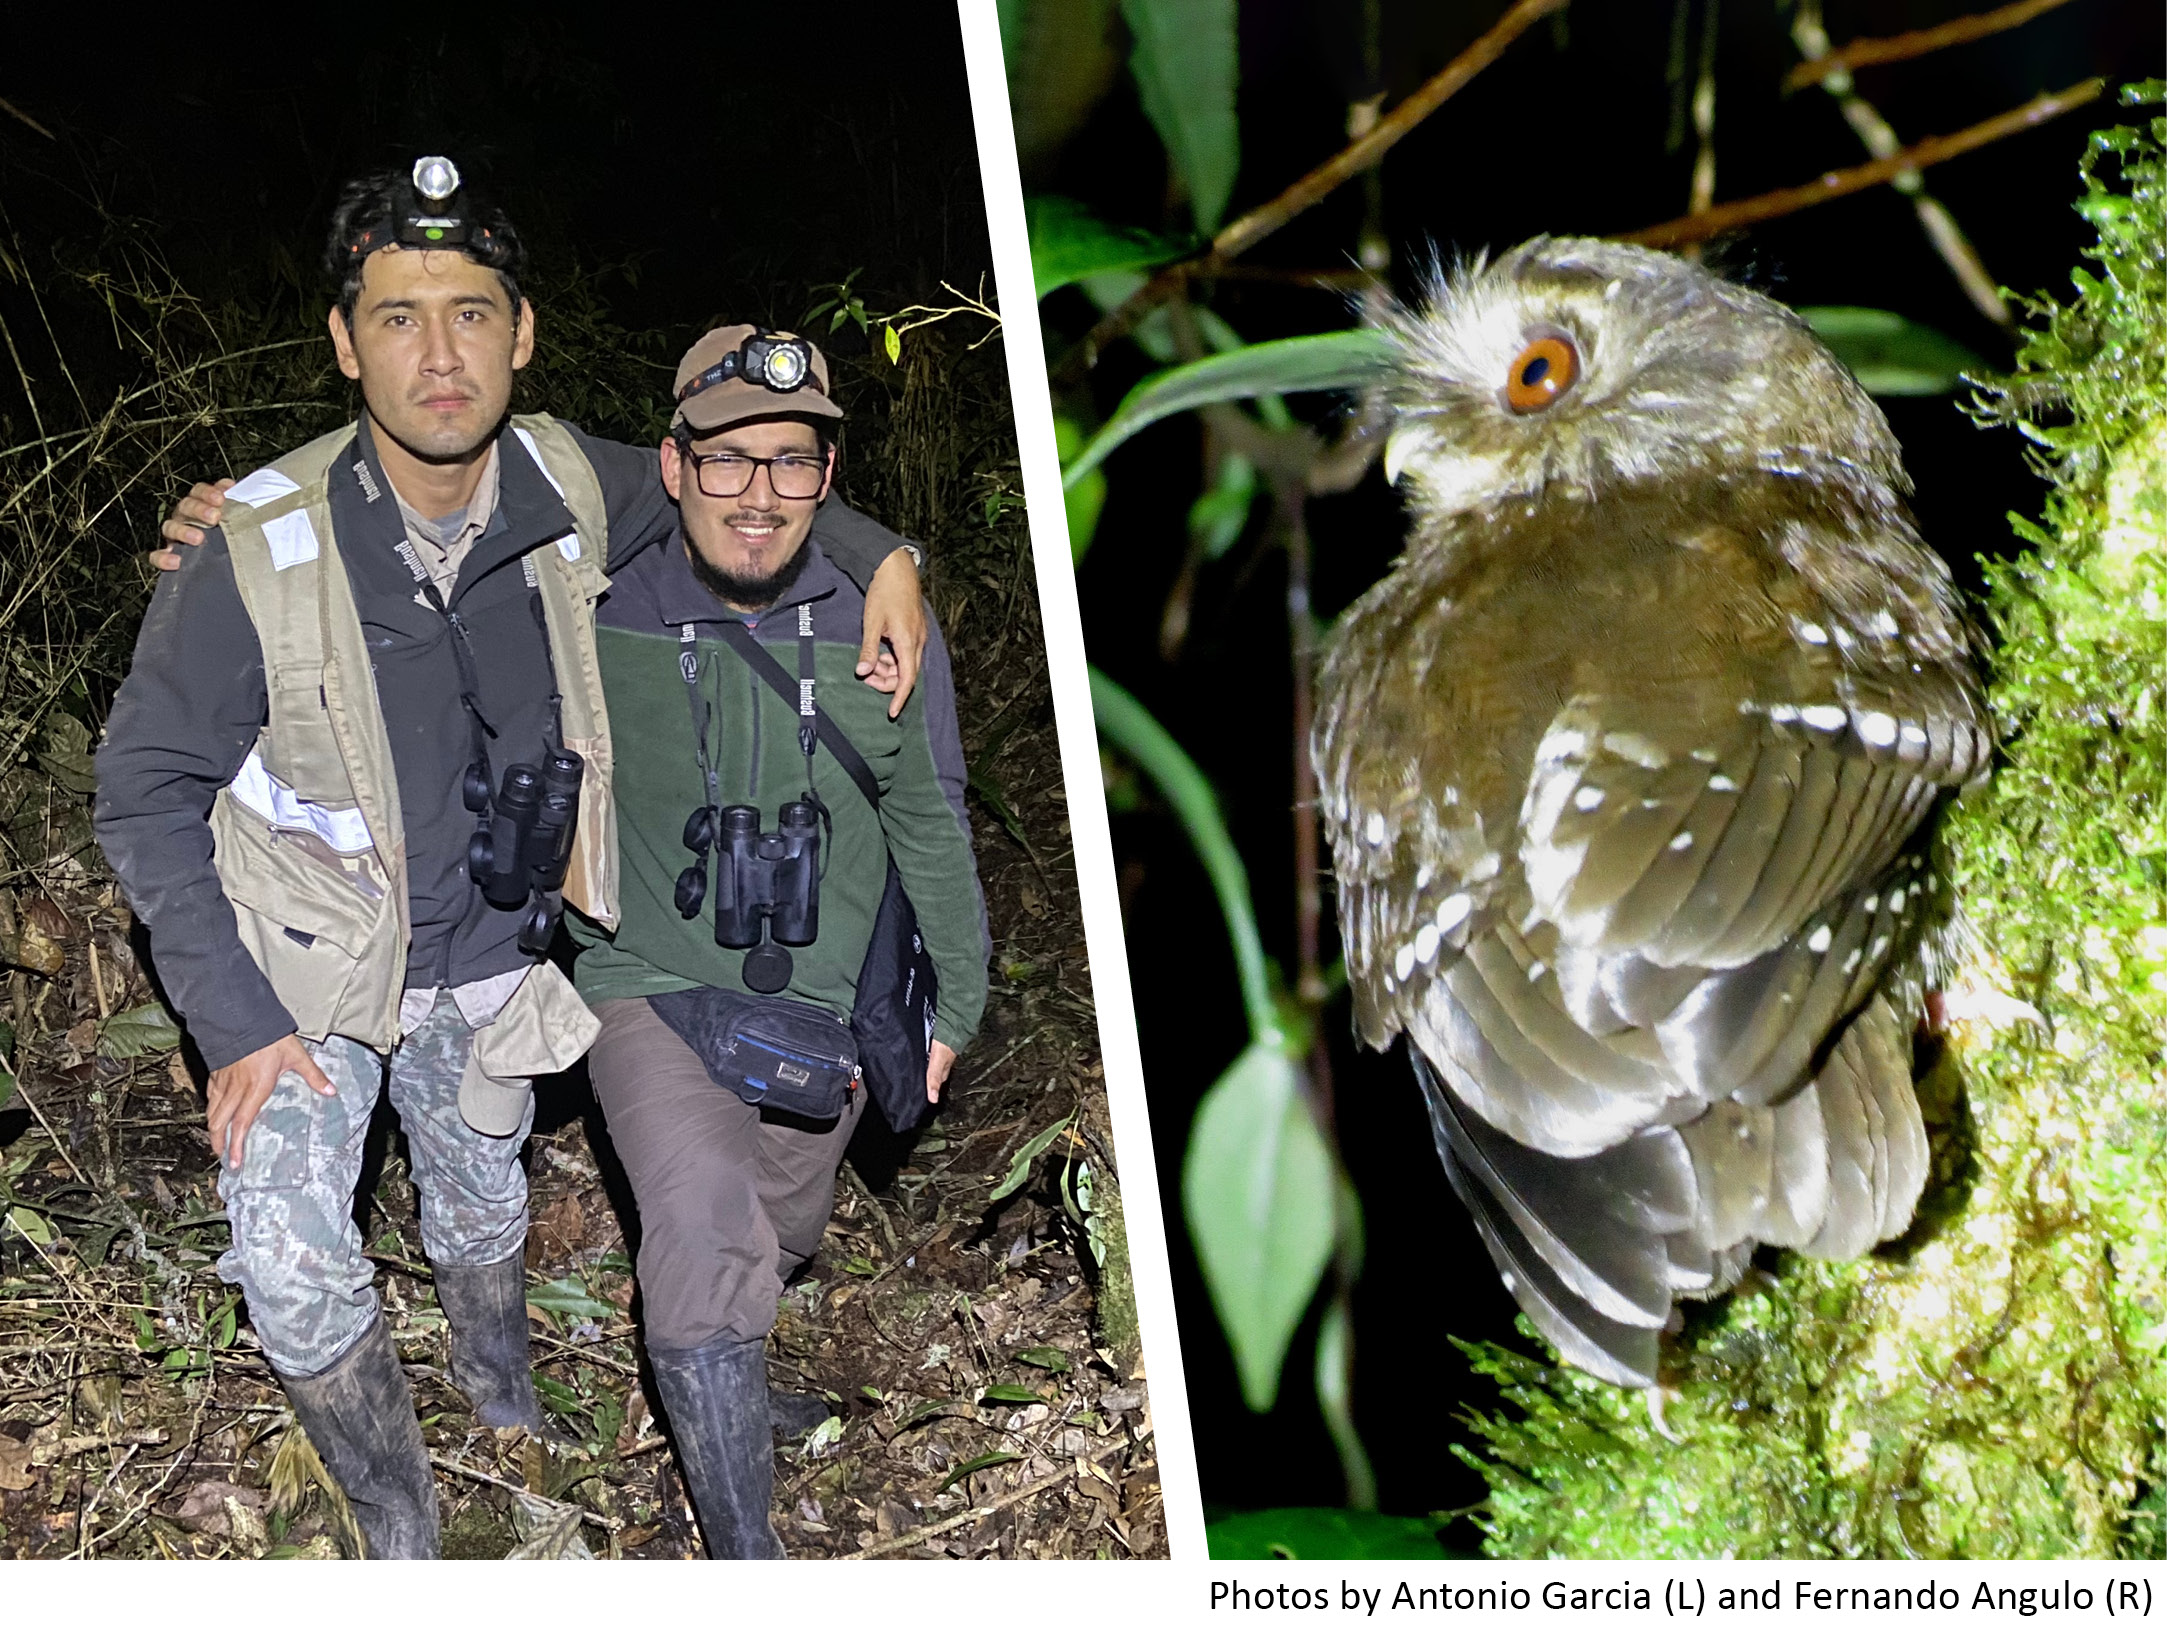 Two photos: left shows two scientists in the field at night; right shows a small owl perched on a moss-covered tree